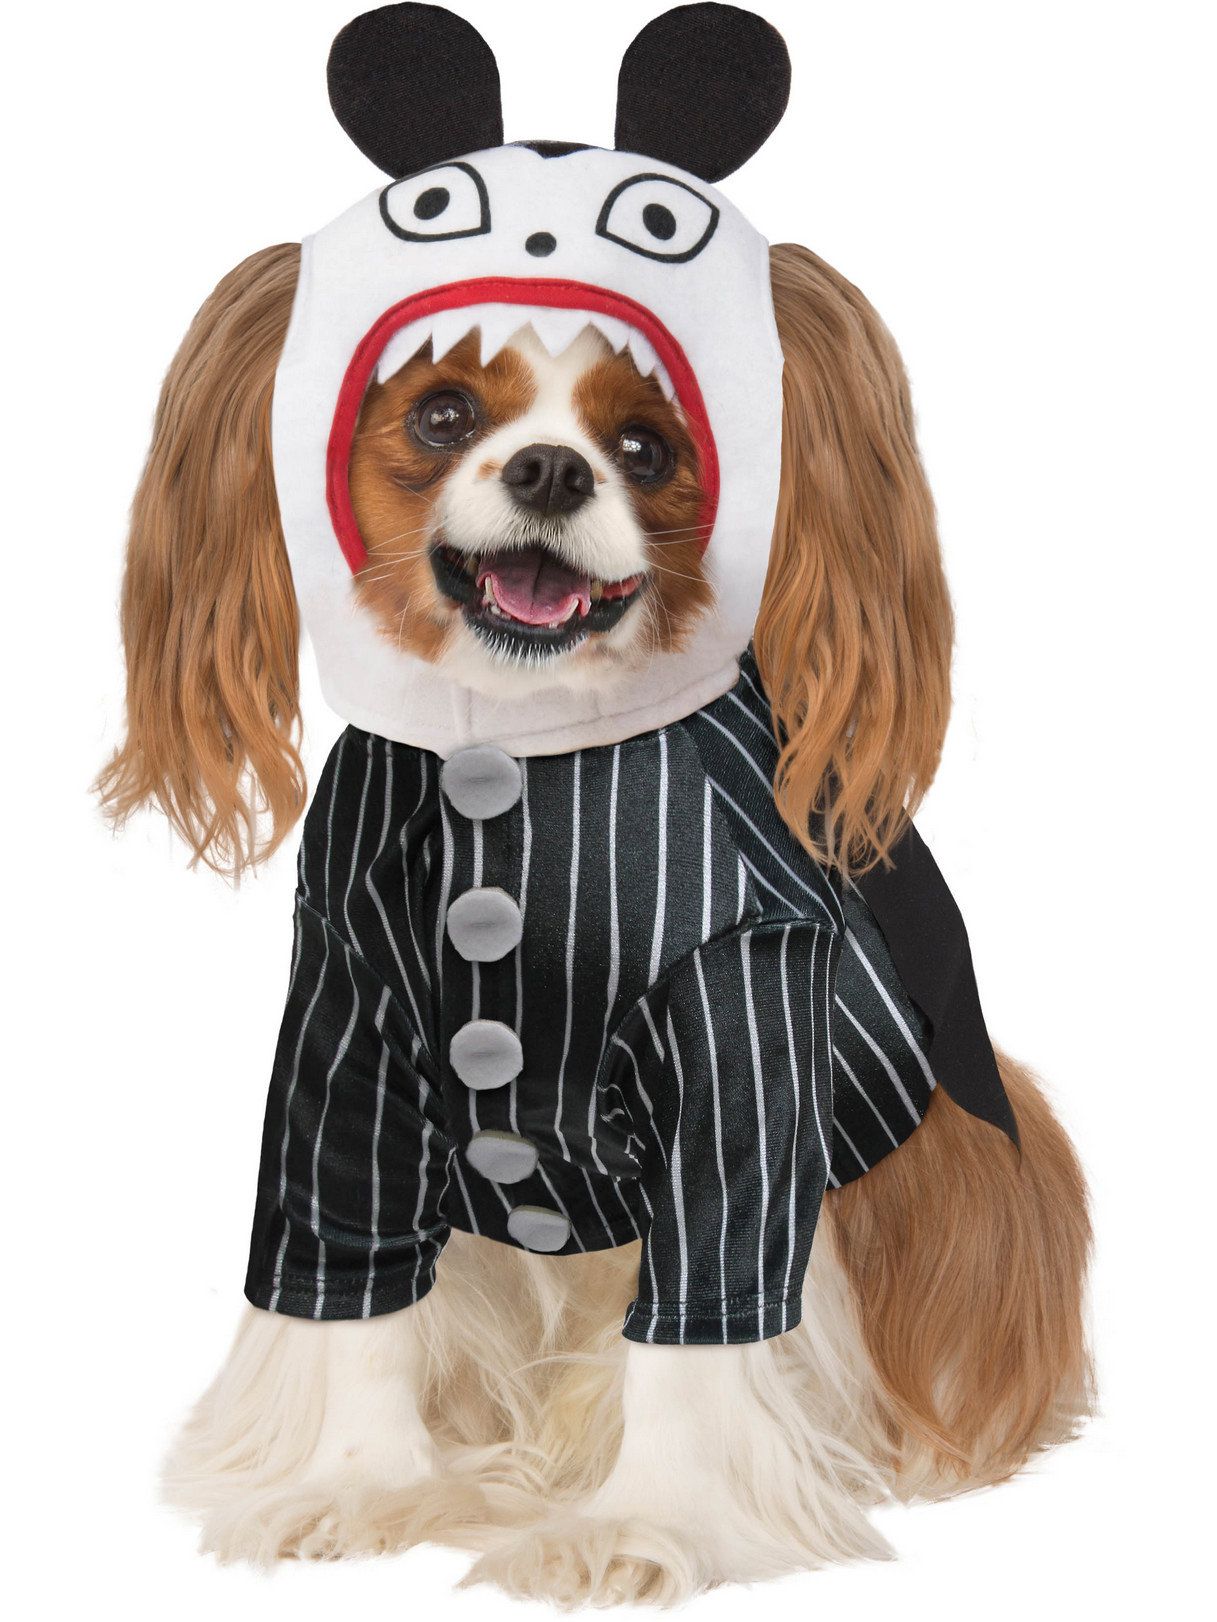 Nightmare Before Christmas Scary Pet Costume - costumes.com